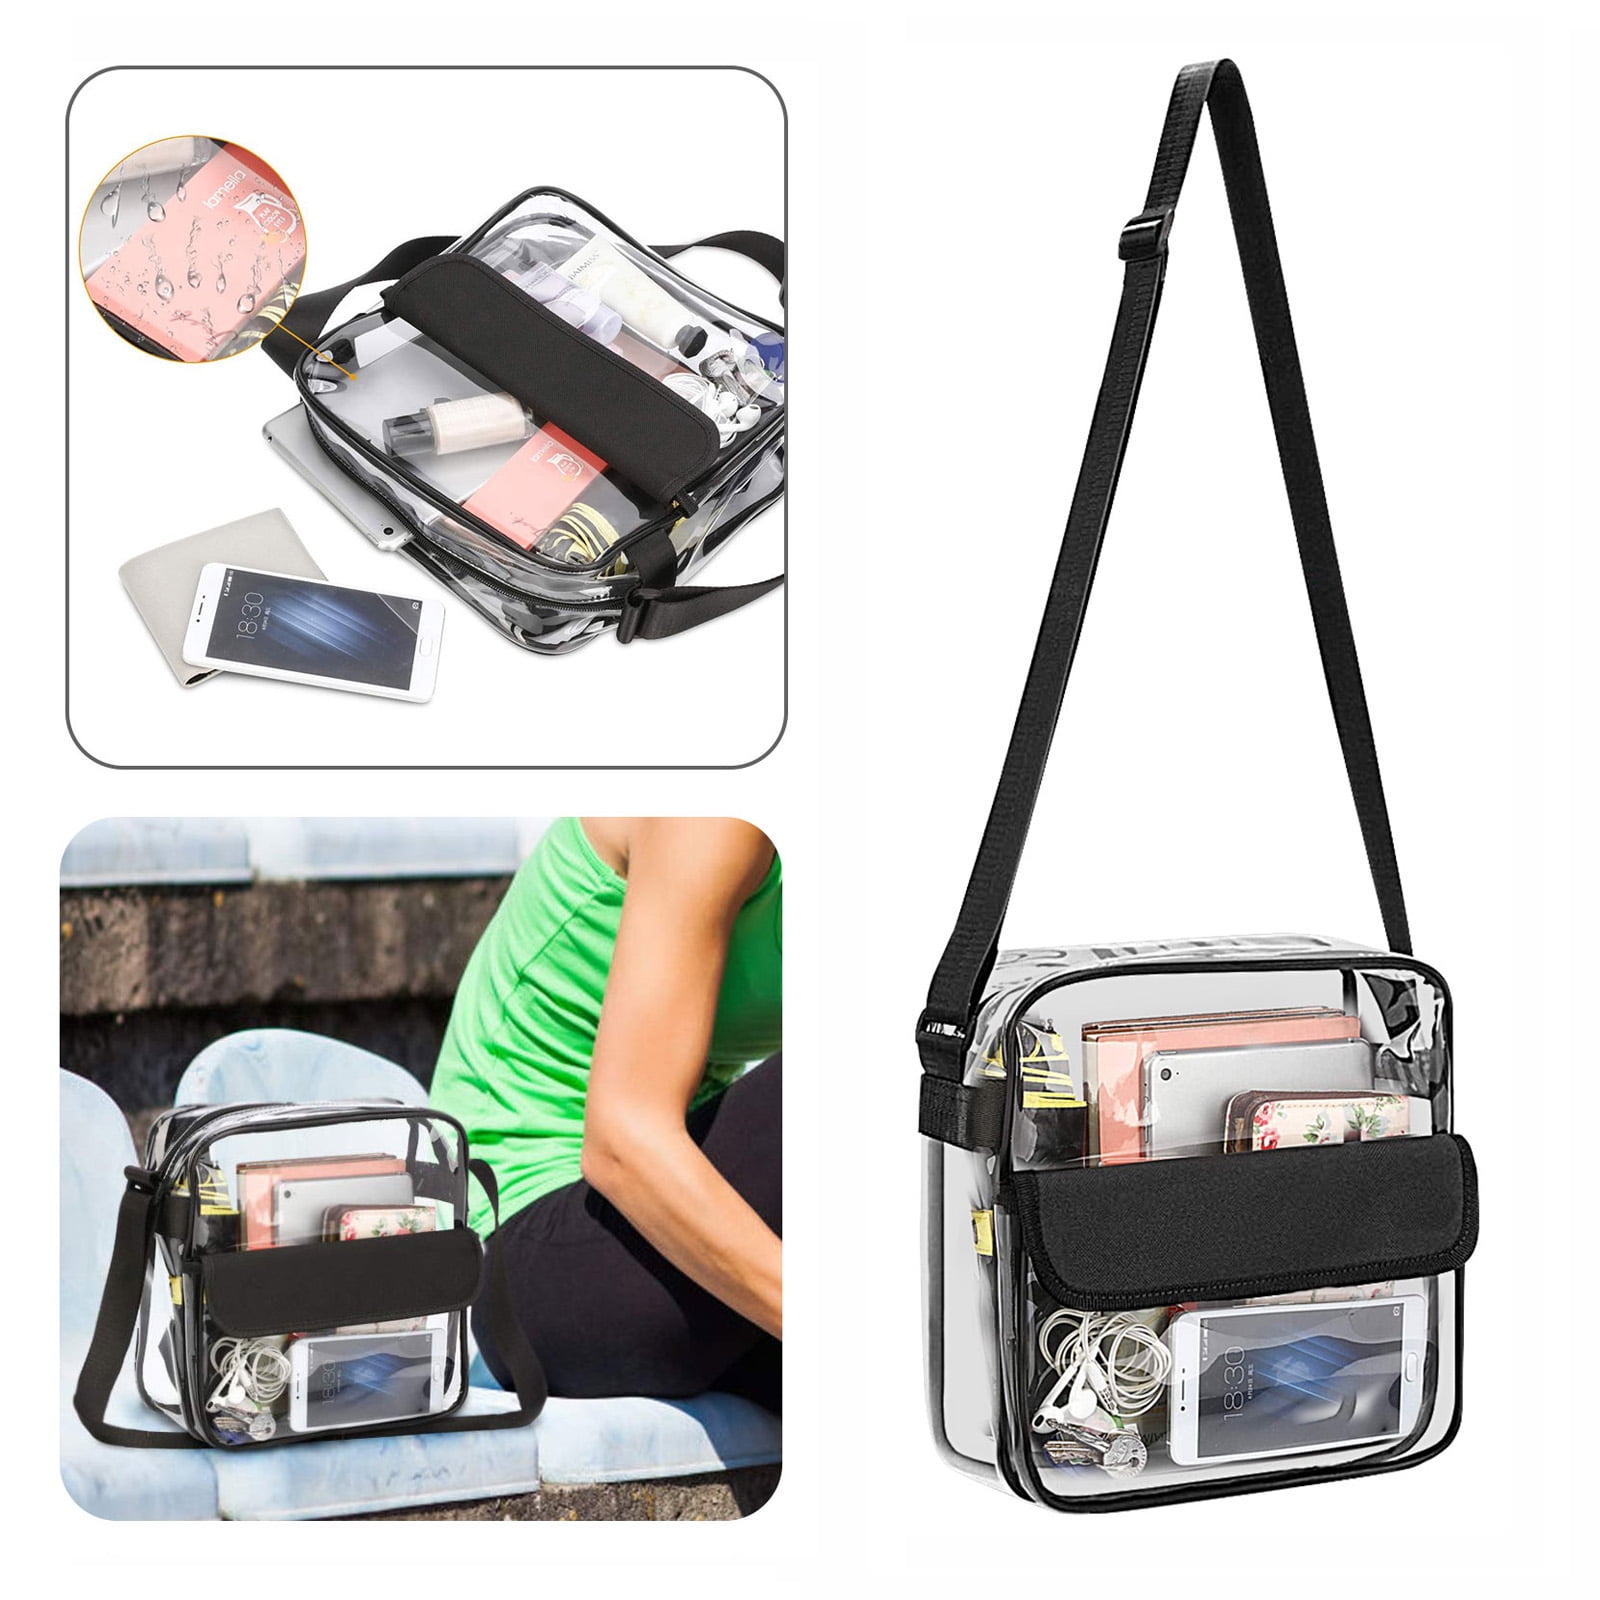  WEIMZC Clear Crossbody Bag Stadium Approved,Adjustable Shoulder  Strap Clear Crossbody Purse for Concerts, Festivals, Sports Events